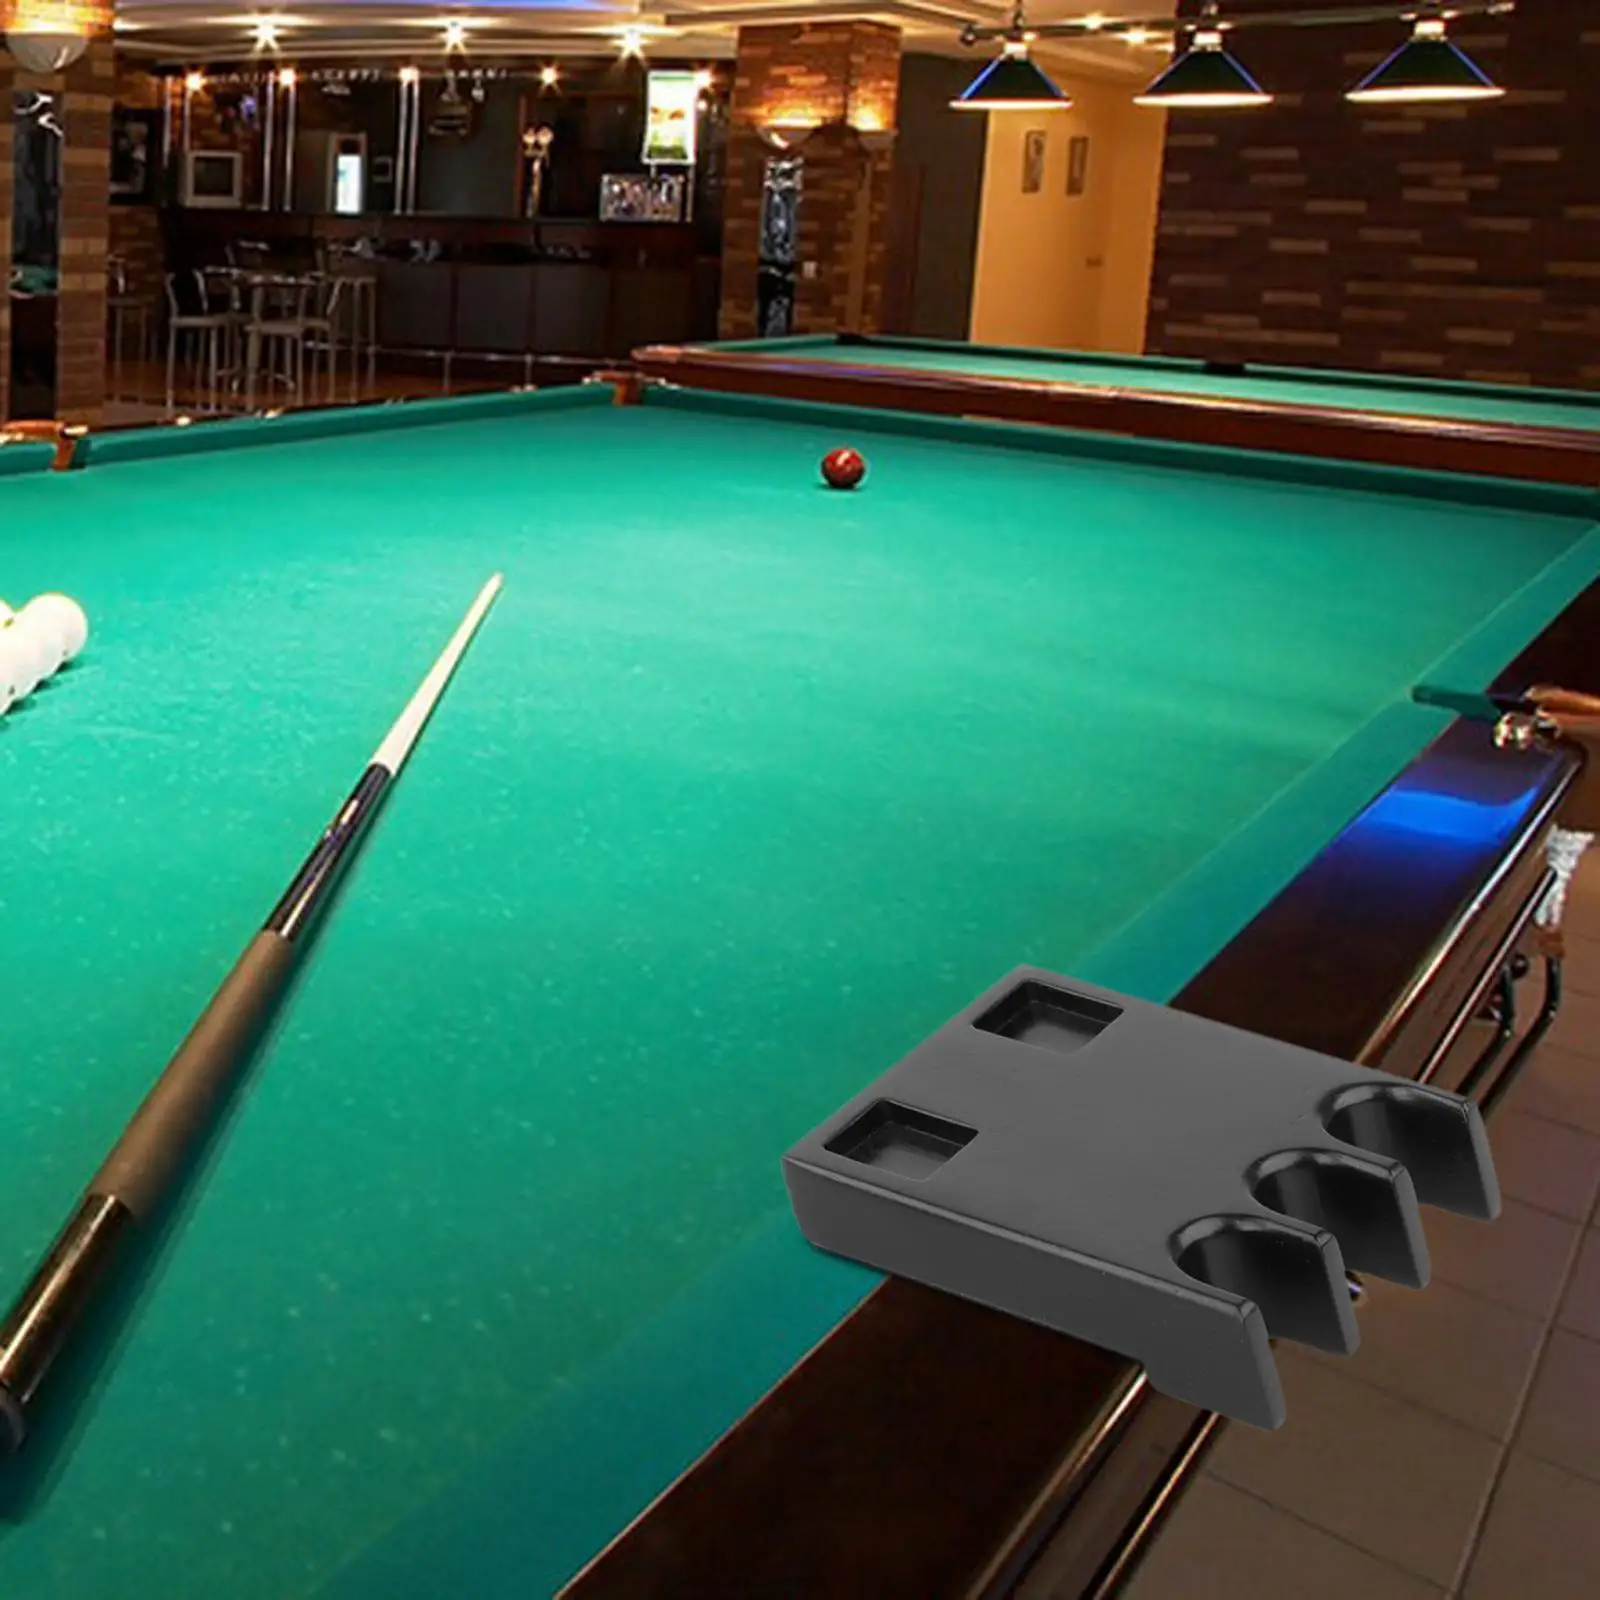 Pool Cue Holder Table Portable Wood with 2 Chalk Holes Cue Holder Stand